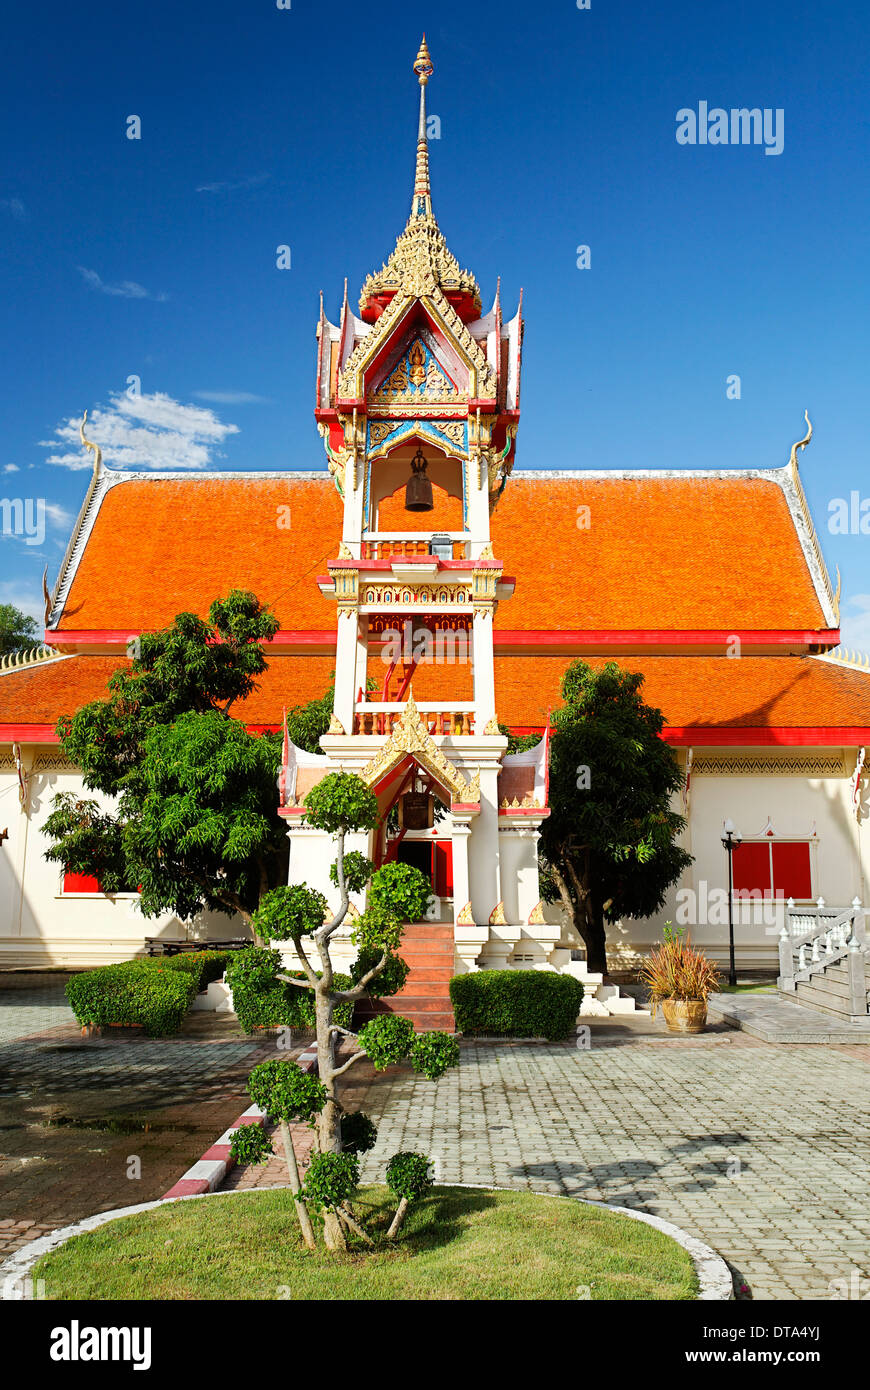 Bell Tower, temple Wat Chalong, Phuket, Thailand Banque D'Images